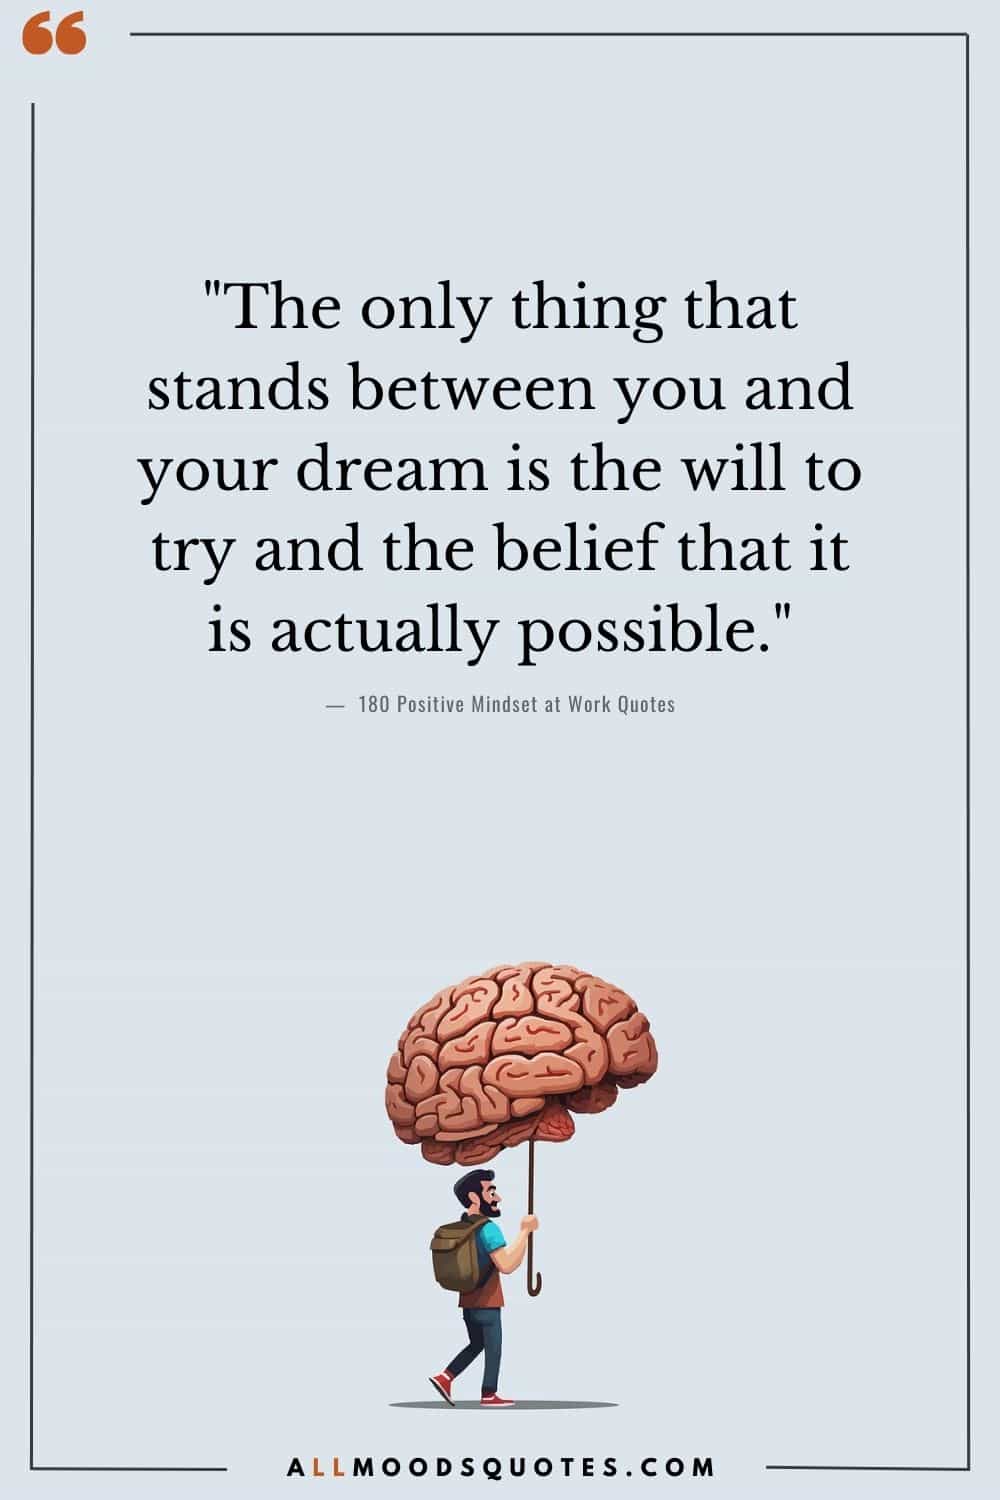 "The only thing that stands between you and your dream is the will to try and the belief that it is actually possible." - Joel Brown